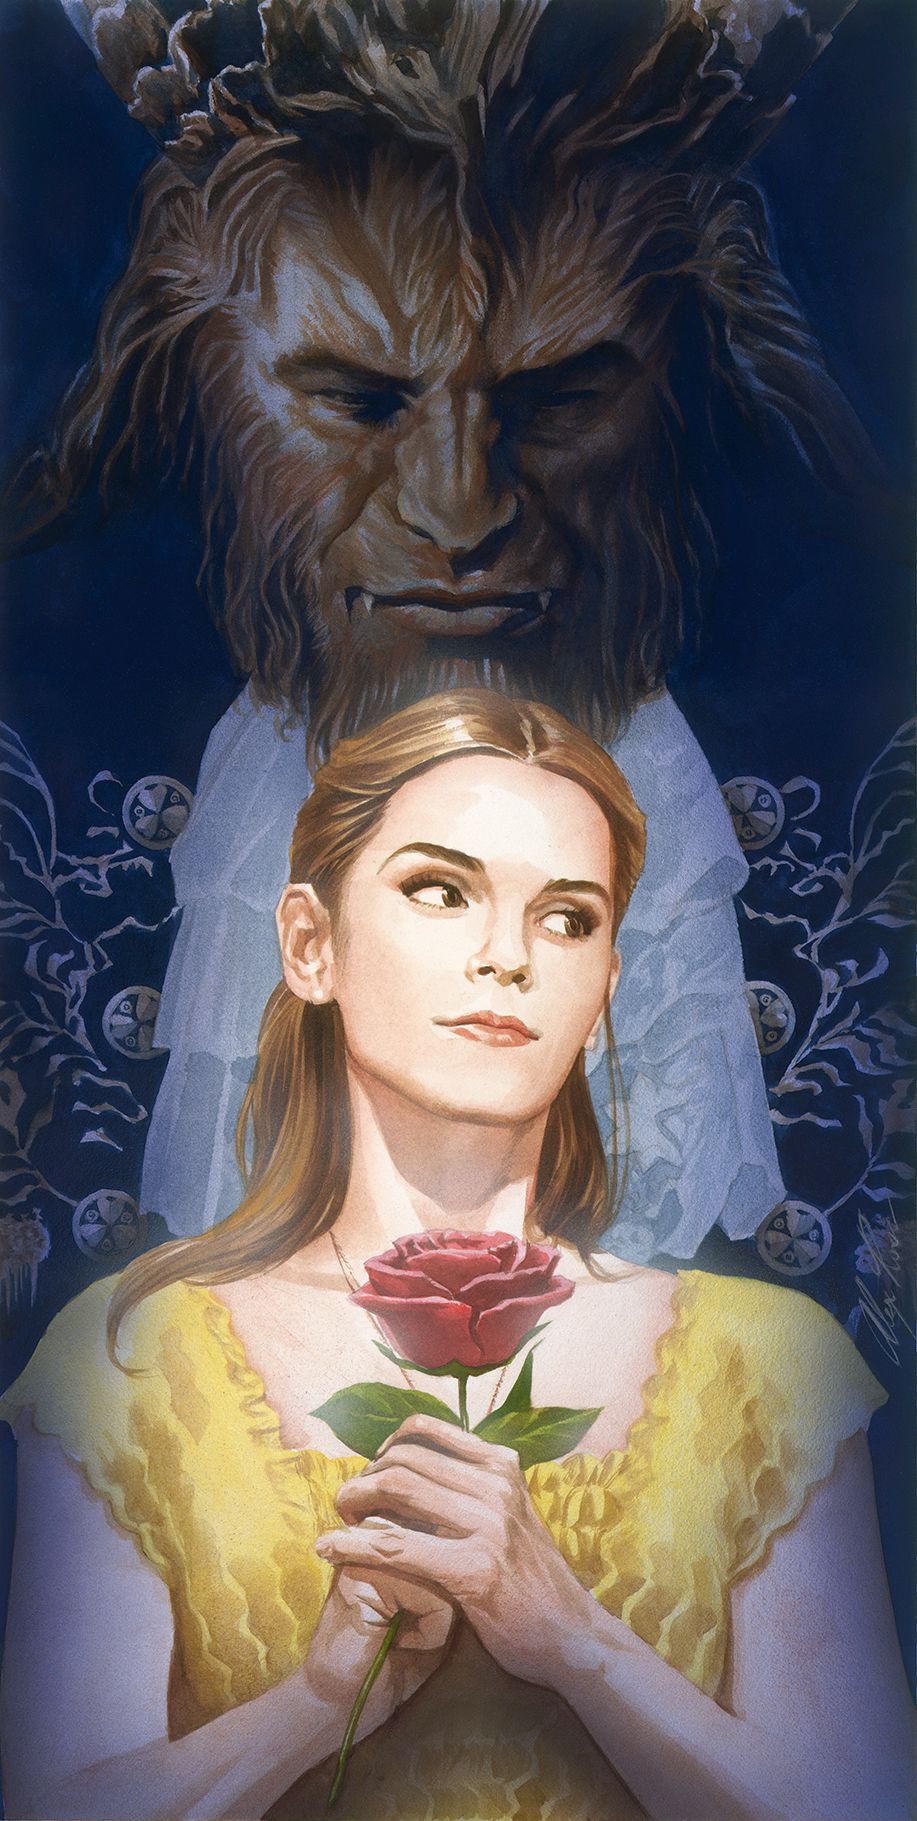 Beauty and the Beast: Alex Ross Poster Is Gorgeous | Collider